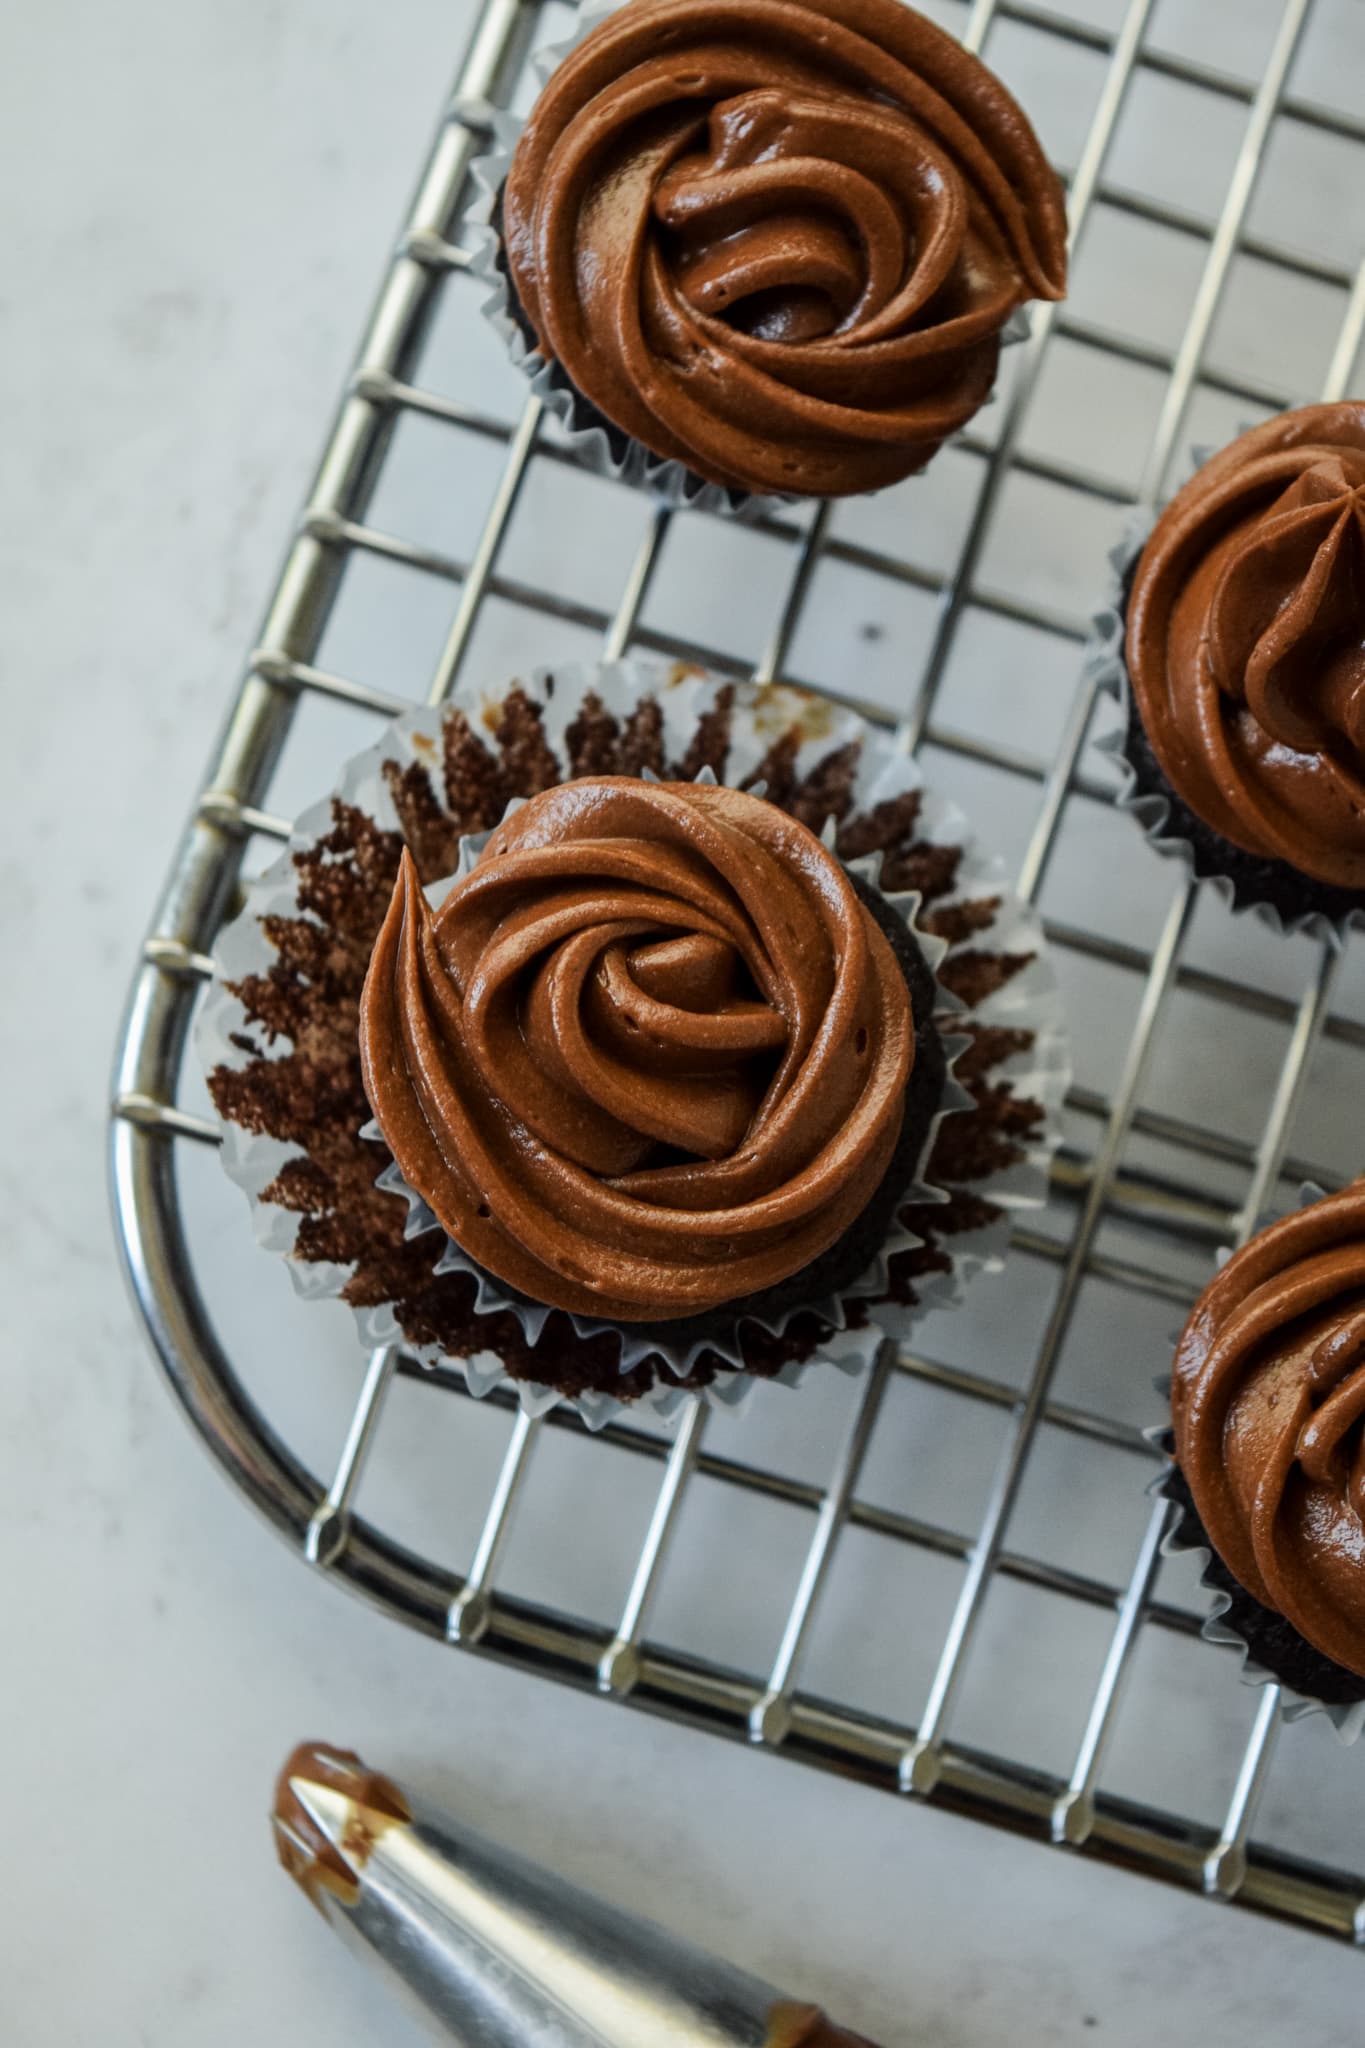 Gluten Free Beatty's Chocolate Cupcakes from Ina